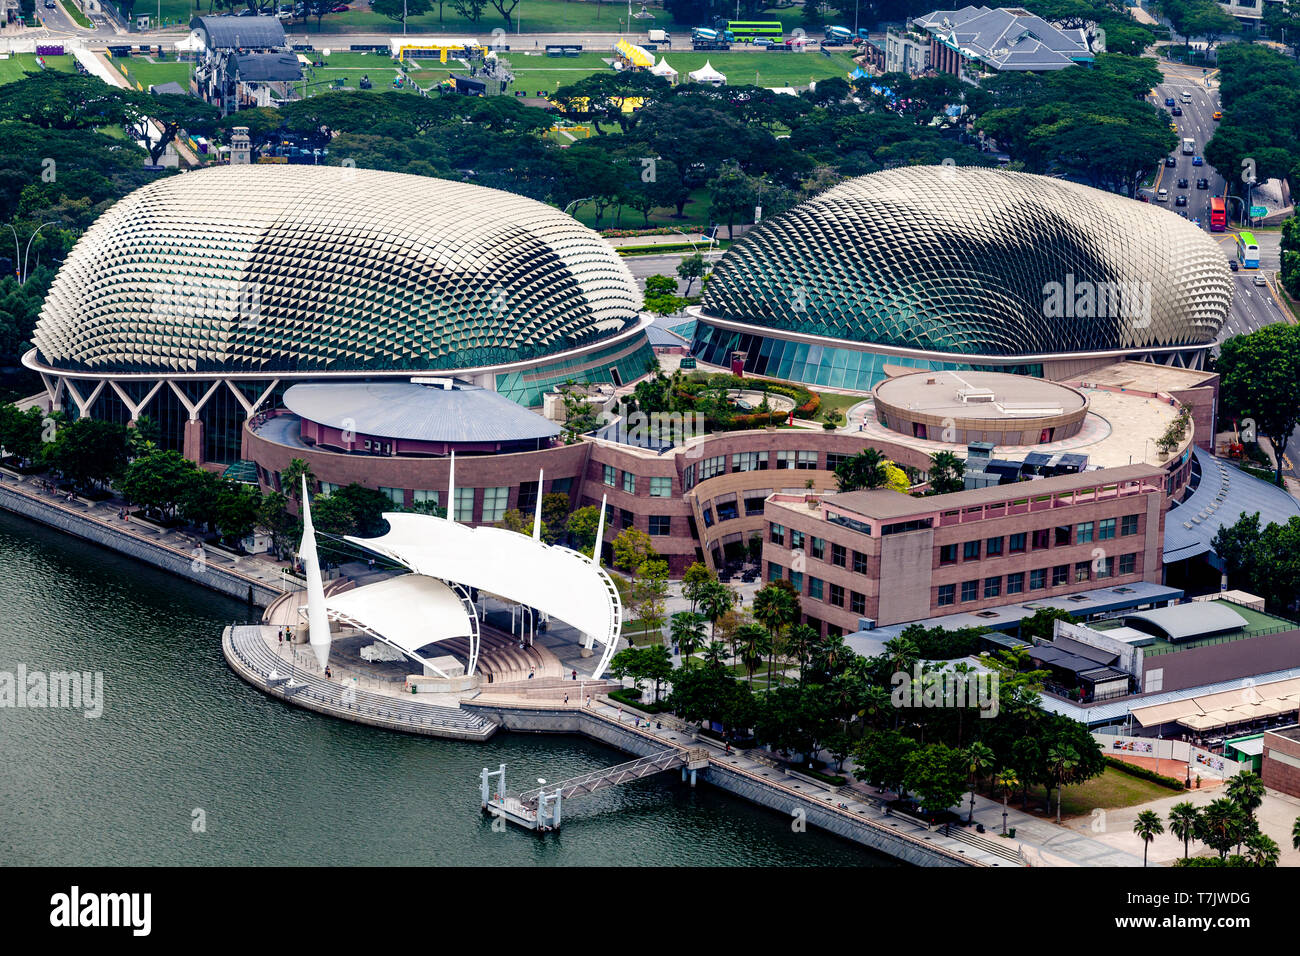 An Aerial View Of The Esplanade Theatres On The Bay, Singapore, South East Asia Stock Photo